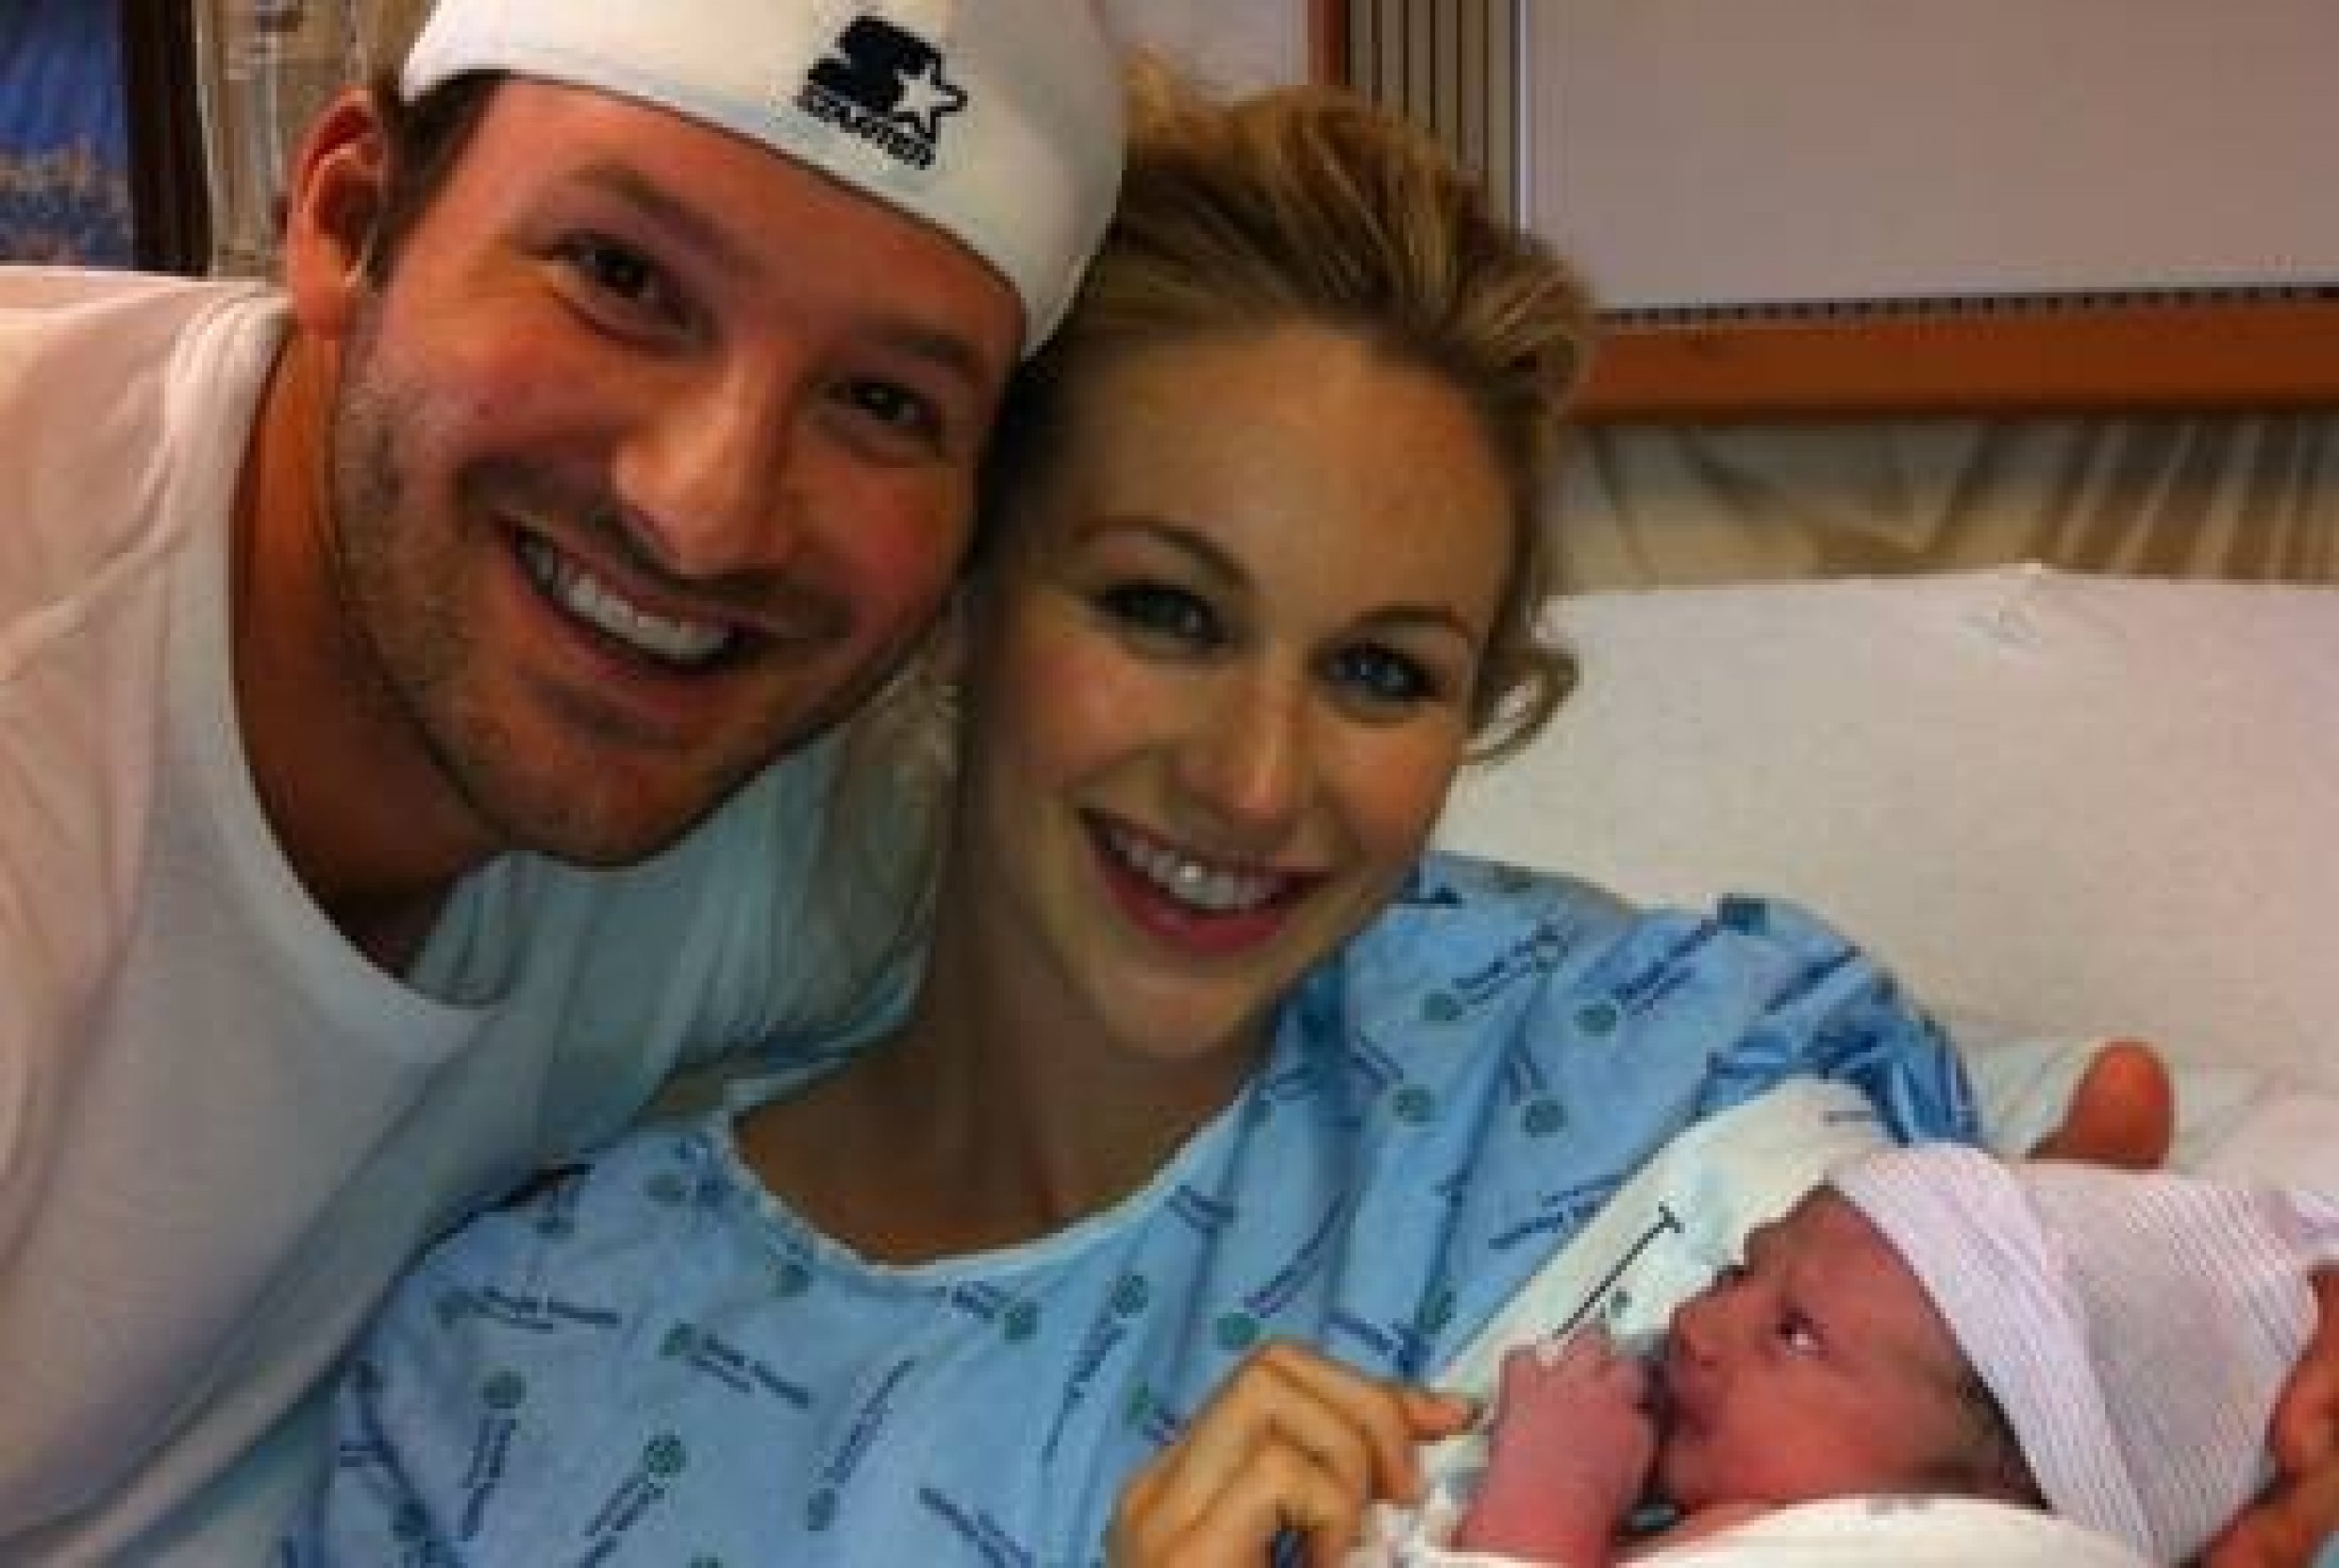 Candice, Tony and their new baby Hawkins Romo in their hospital room.